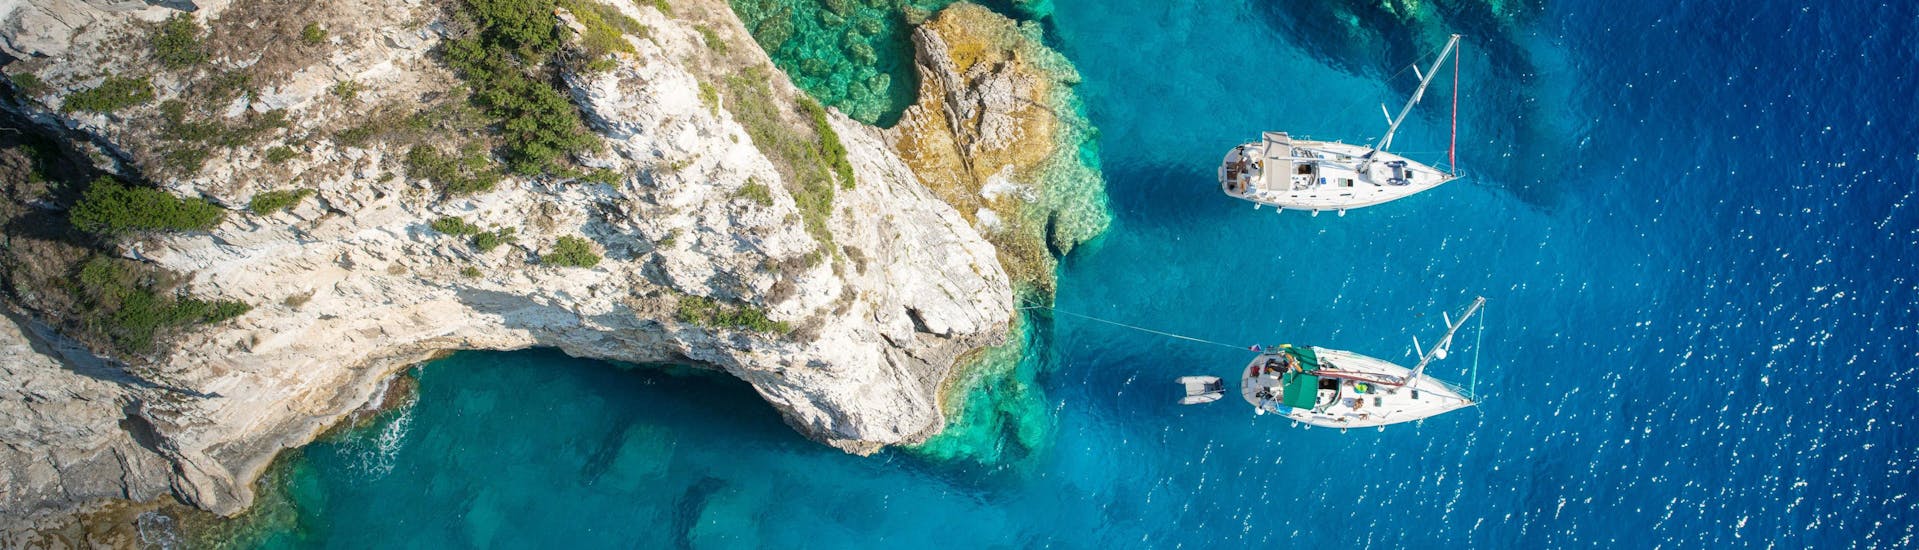 Aerial view of a cove on the island of Paxos where boats are moored, a popular destination in Greece for boat trips.